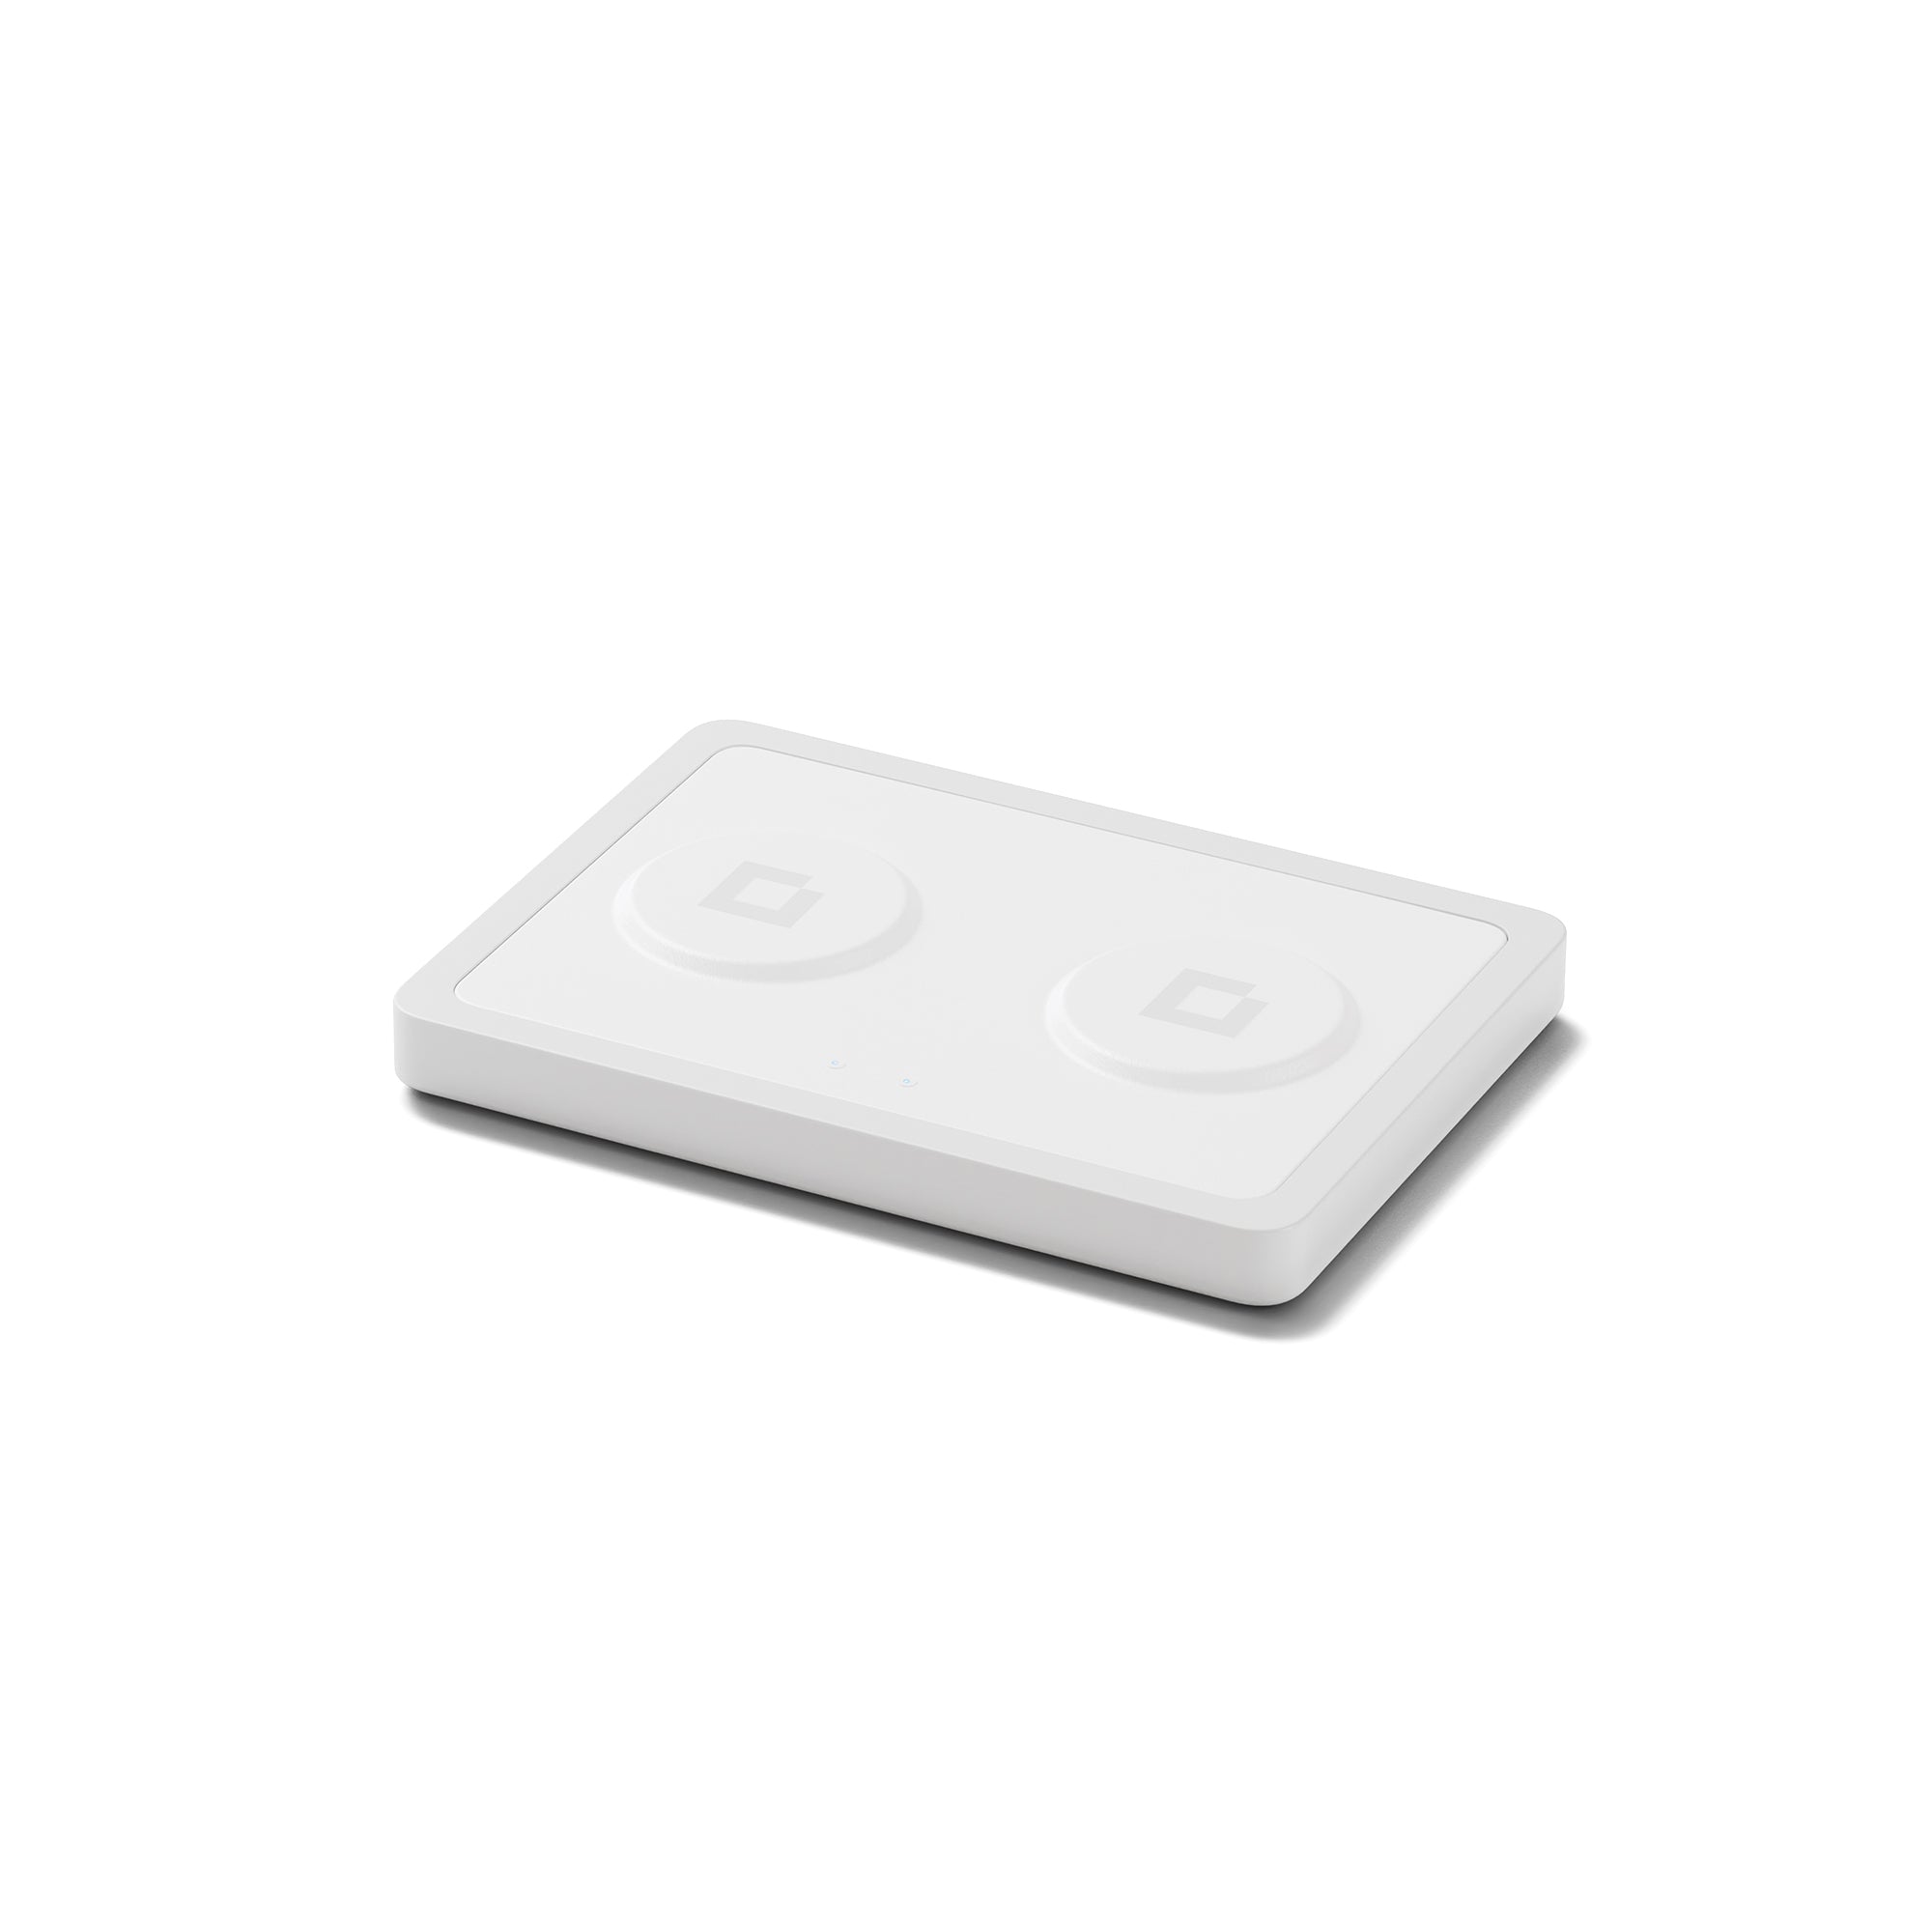 DUO White - 2-in-1 MagSafe Rustic White Wireless Charger with USB-C and A Ports Support angle view without devices